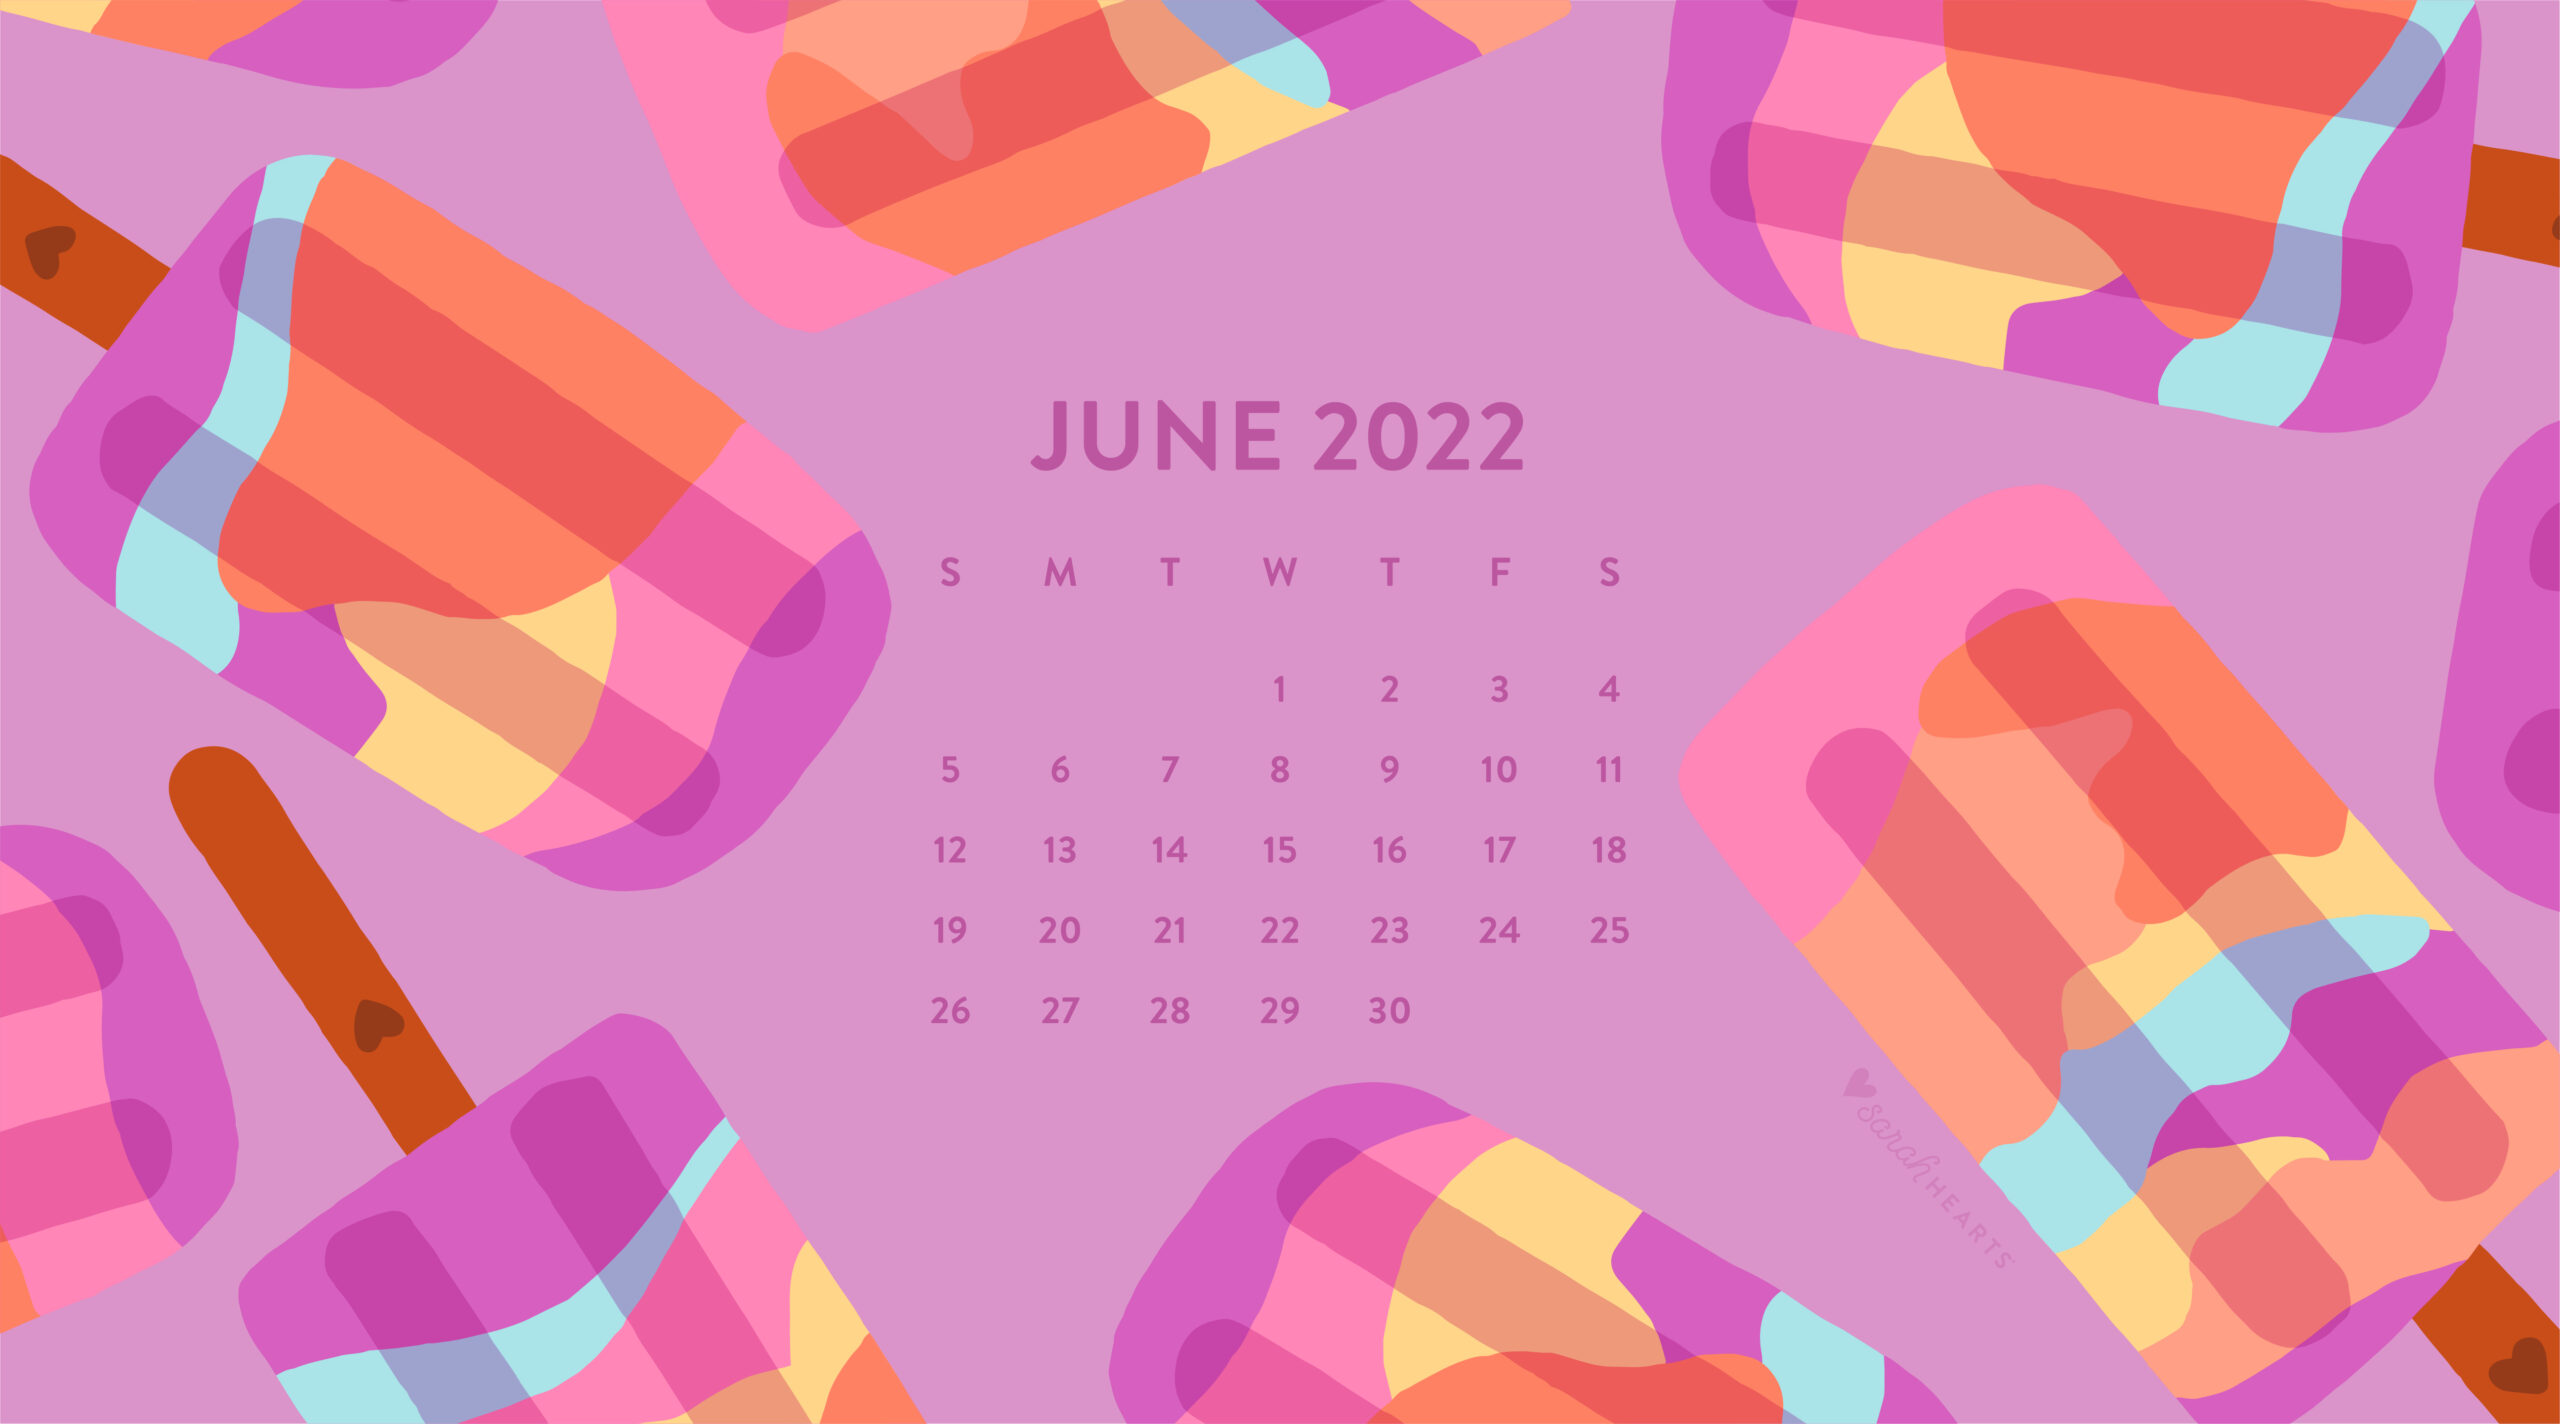 Free Downloadable Tech Backgrounds for June 2022  The Everygirl